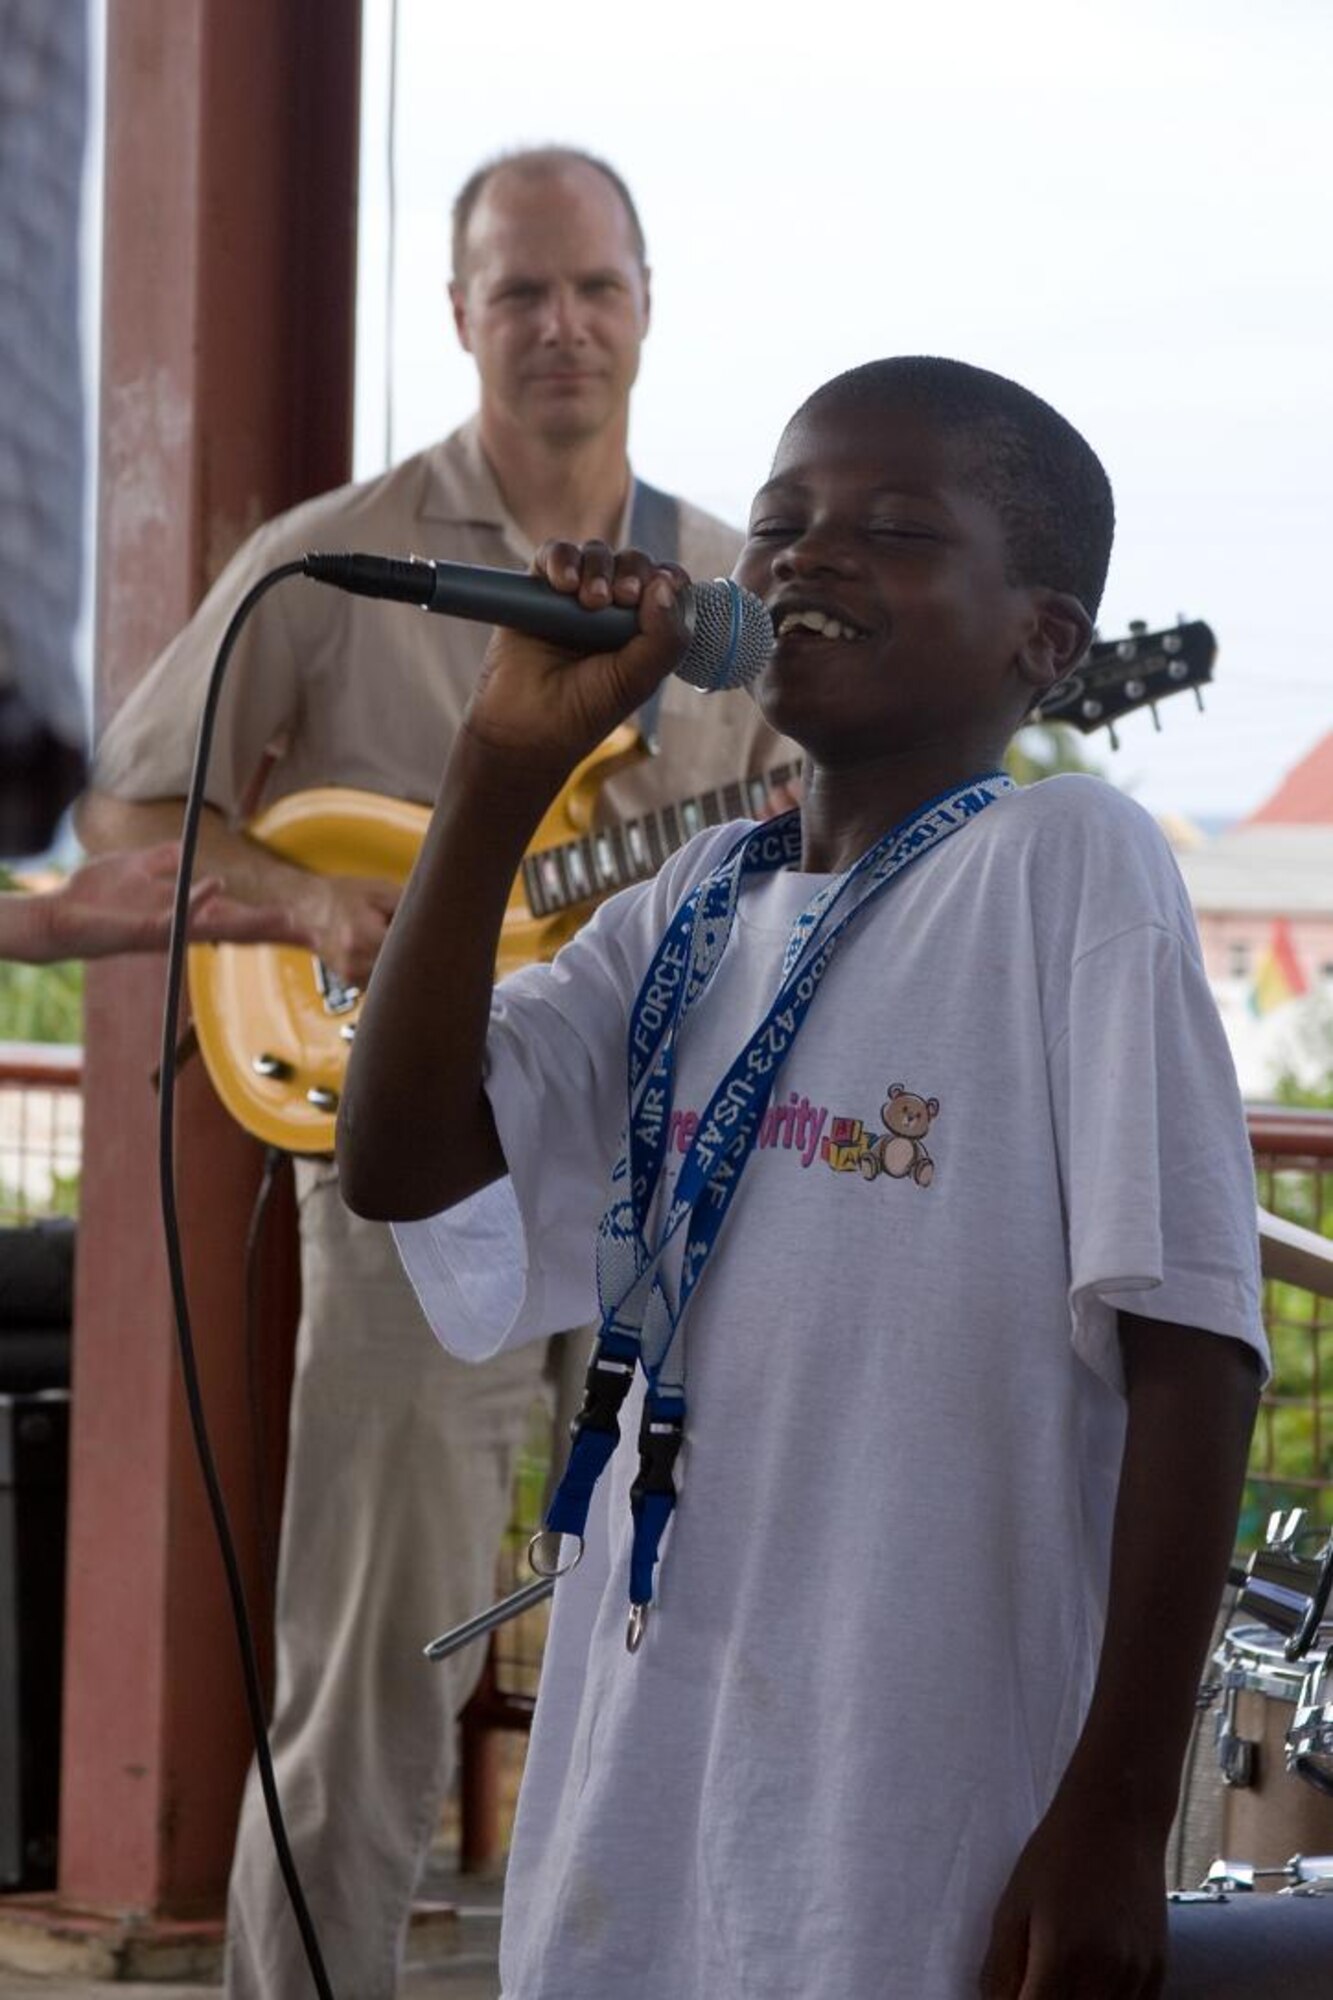 VICTORIA, Grenada -- An orphan from the Father Mallaghan’s Home for Boys sings along with the U.S. Air Force Academy Band “Blue Steel” in Victoria, Grenada, June 1. Blue Steel spent the day with orphans from Father Mallaghan’s Home for Boys before performing a public concert in the center of the village.  The community outreach event is part of Operation Southern Partner, an Air Forces Southern-led event aimed at strengthening partnerships with nations in the U.S. Southern Command area of focus through mil-to-mil subject matter exchanges.  In addition to the exchange program, Airmen also had the opportunity to volunteer at various charitable and community organizations in each host nation.  (Photo courtesy of Sagar Pathak of HorizontalRain.com)